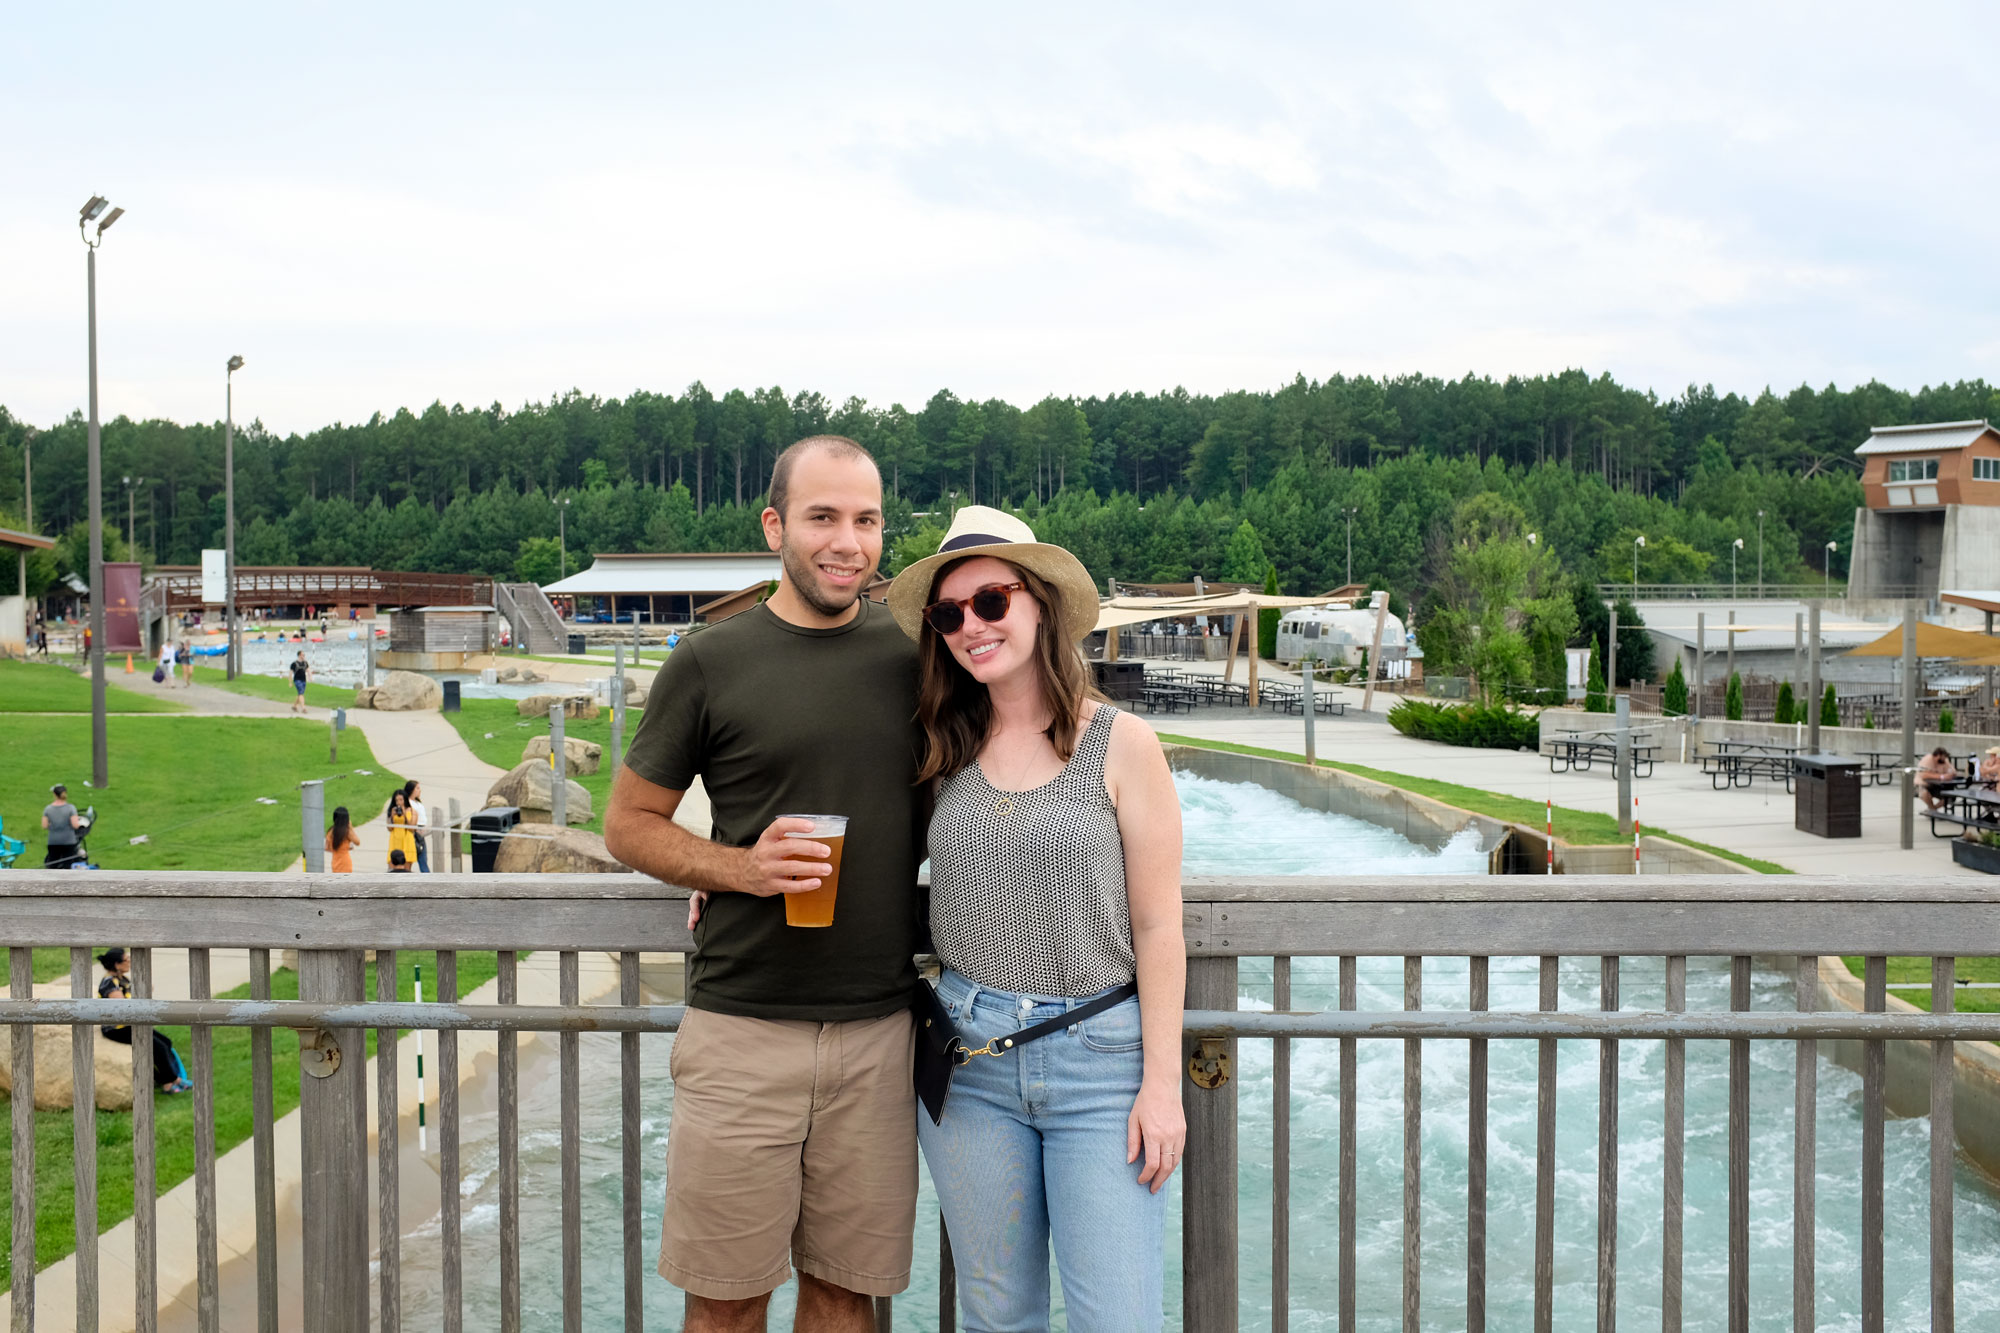 Krystal and Michael standing on a bridge over the National Whitewater Center's whitewater rafting course